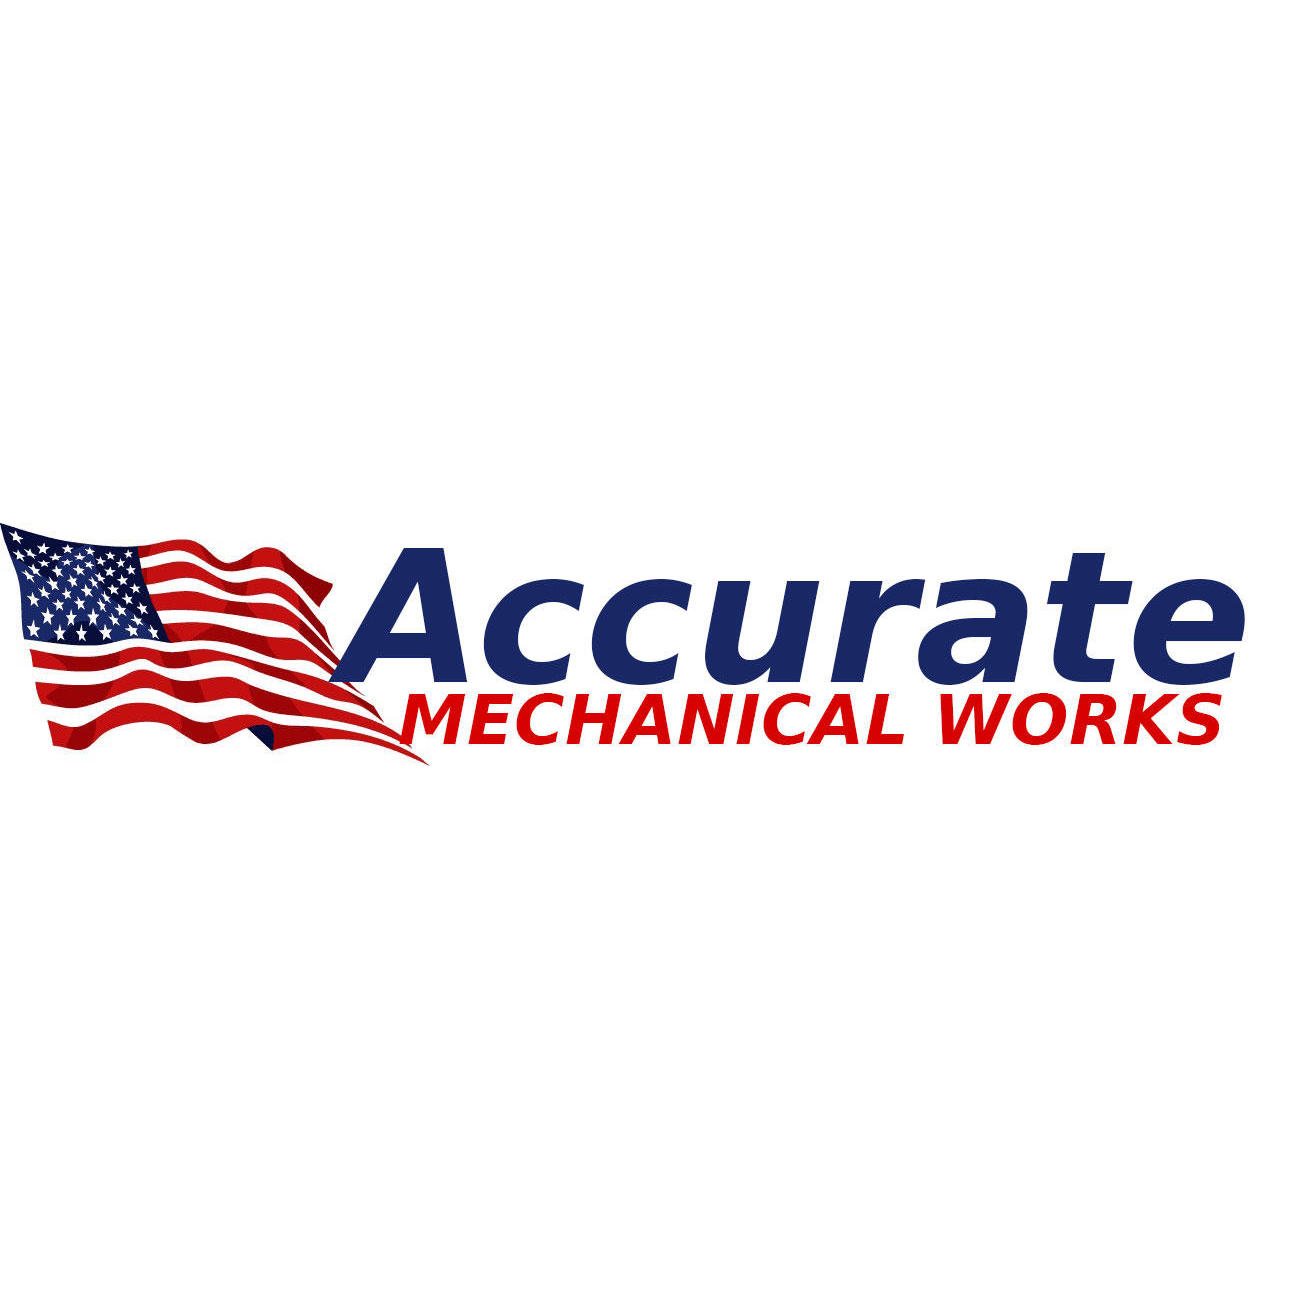 Accurate Mechanical Works Inc